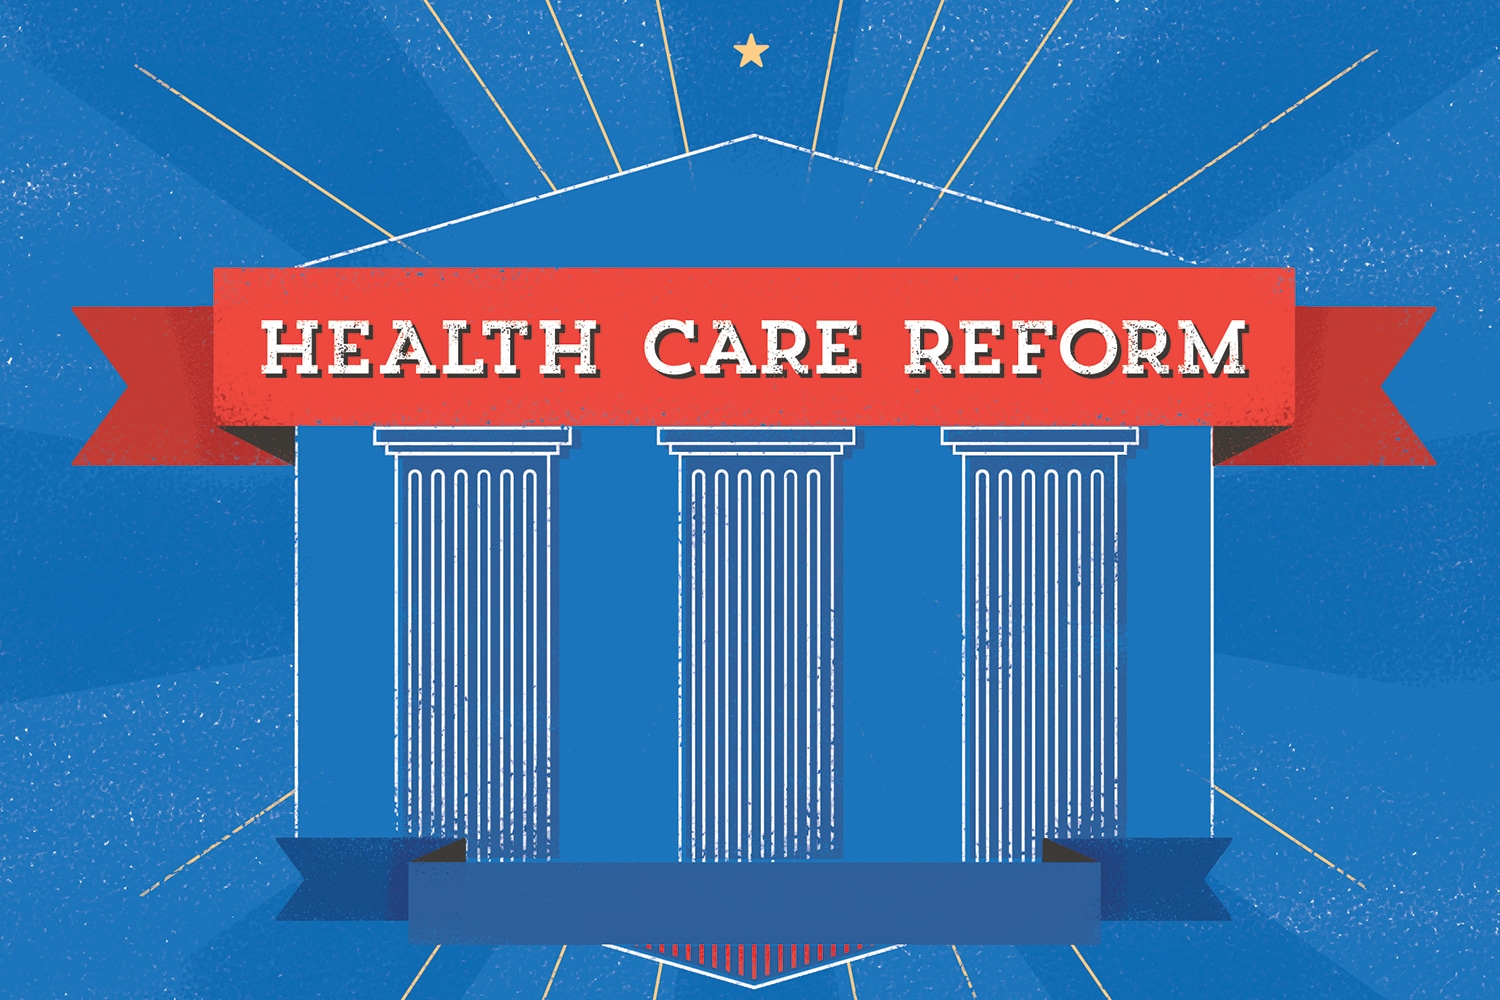 Health Care Reform: What Does It Mean for You?